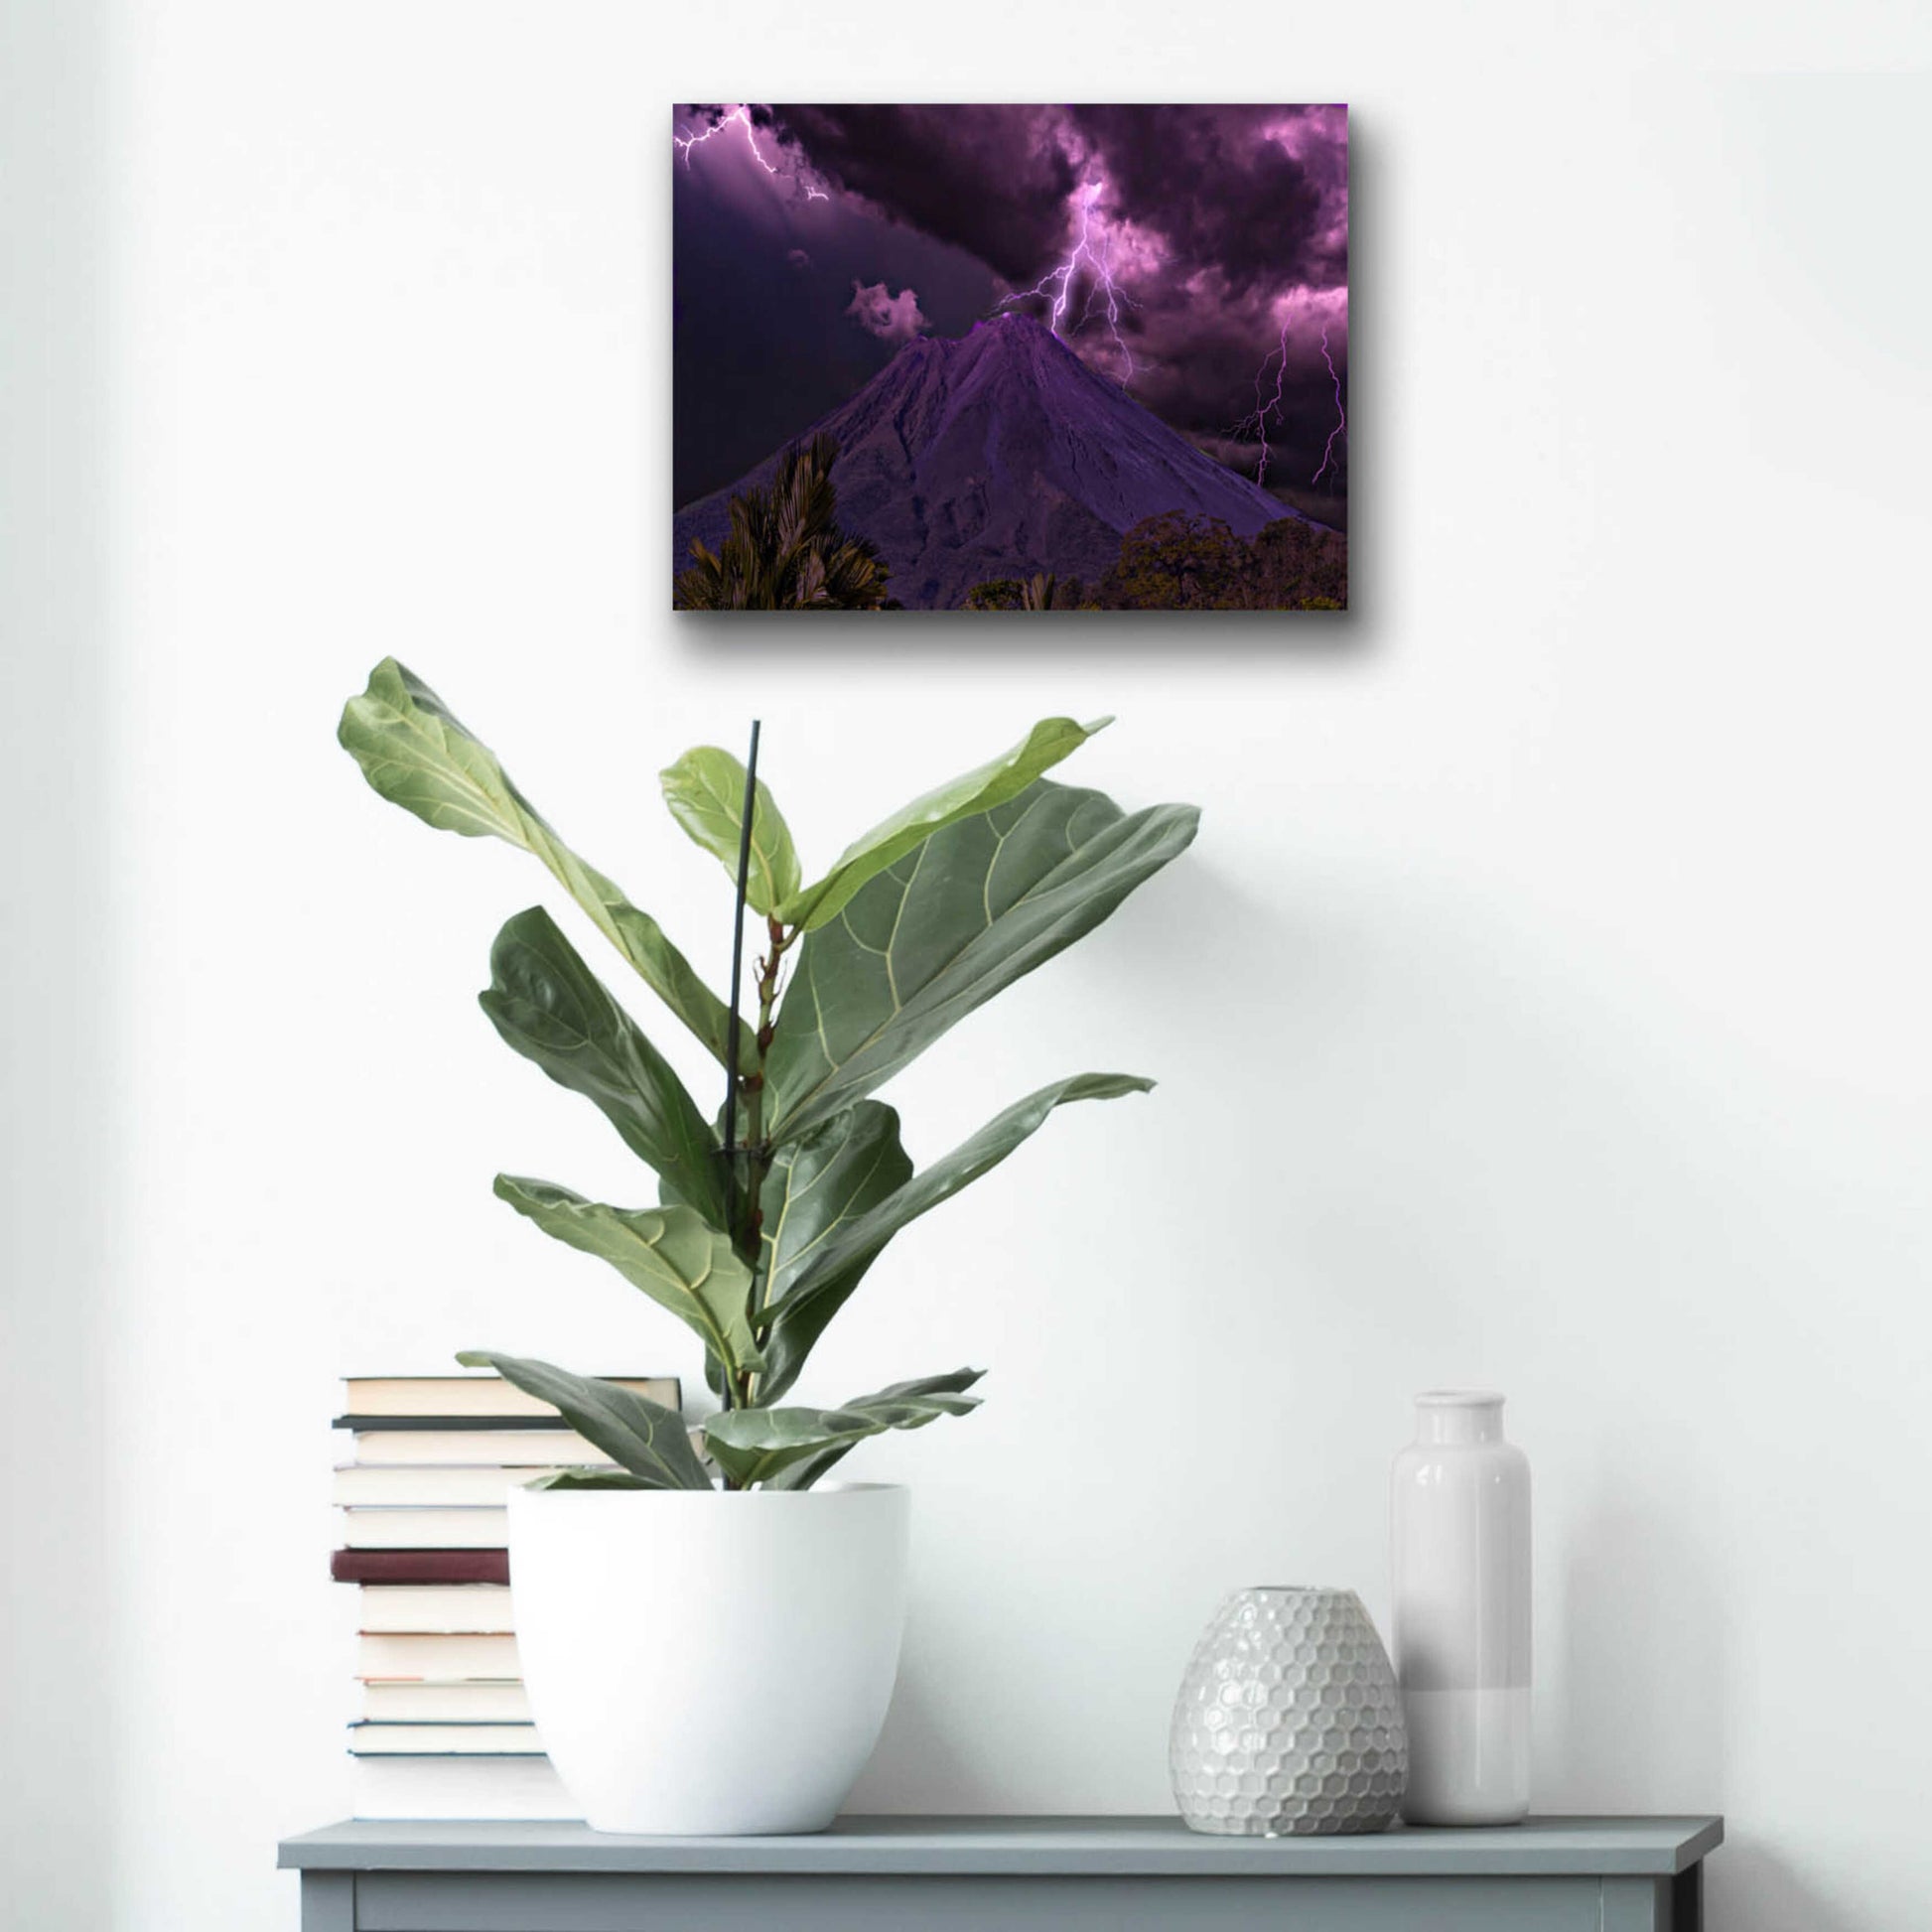 Epic Art 'Lilac Volcano' by Unknown Artist, Acrylic Glass Wall Art,16x12